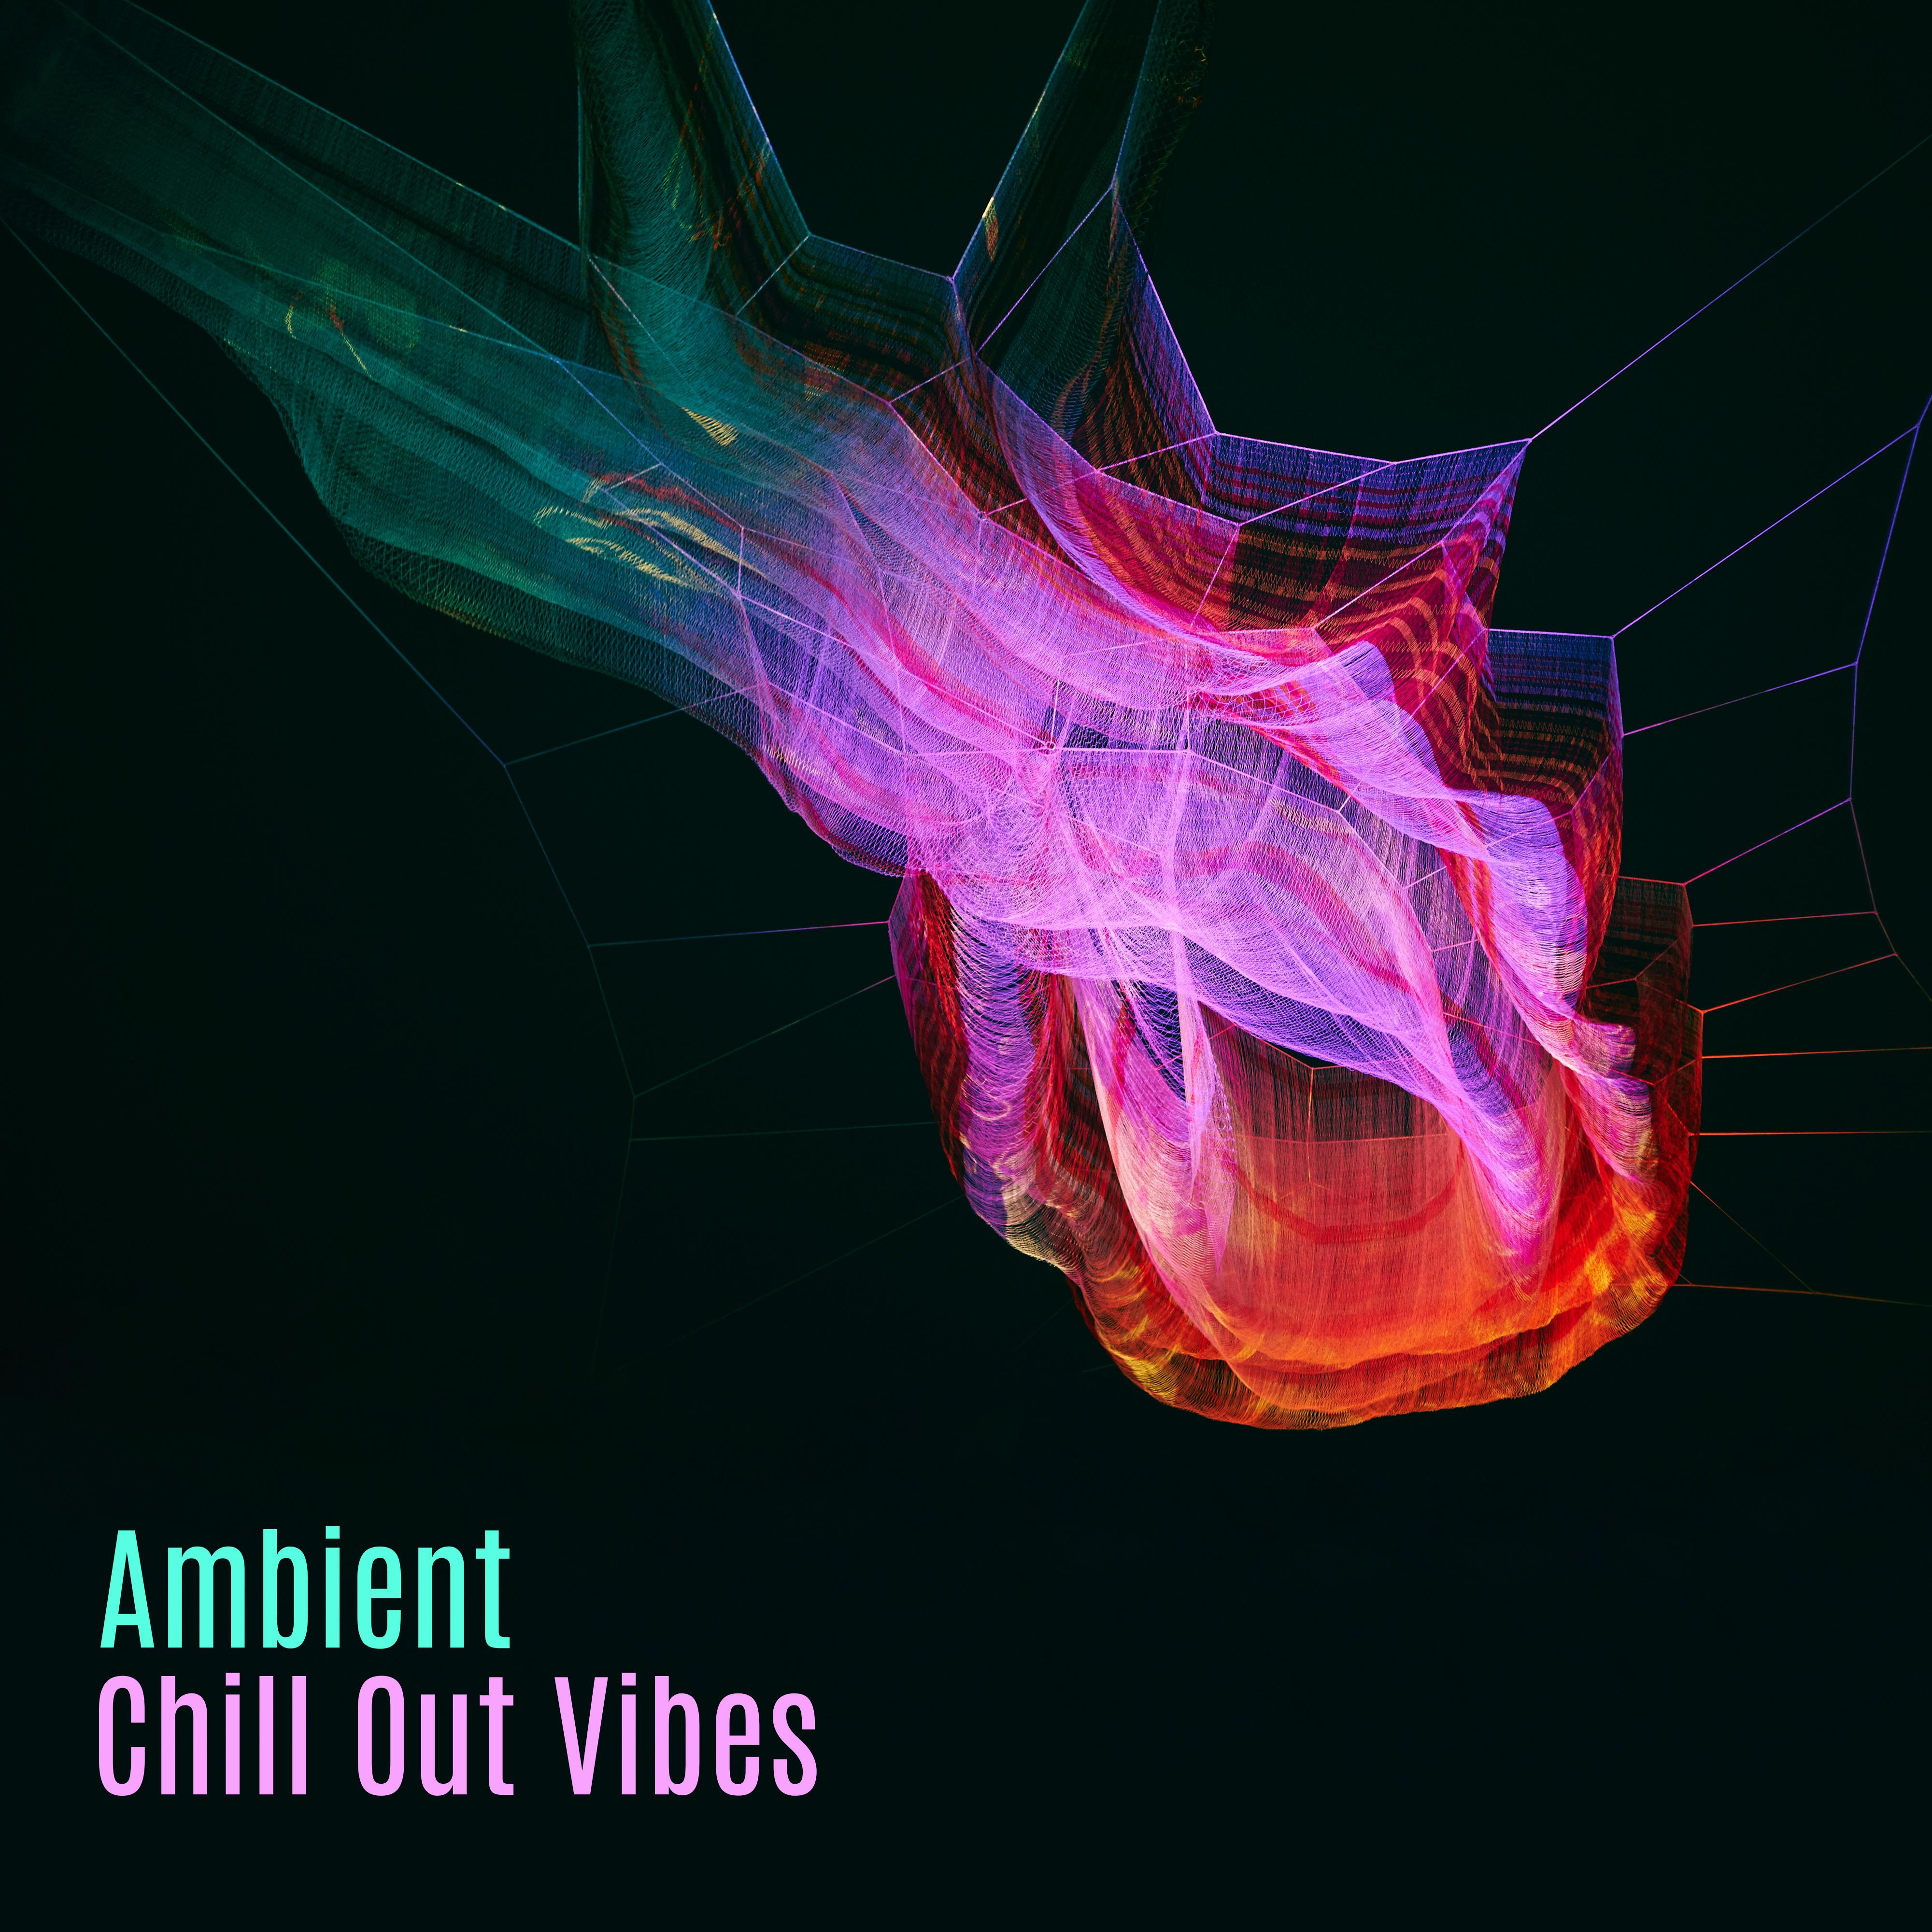 Ambient Chill Out Vibes  Calm Sounds to Relax, Holiday Rest, Summer Vibes for Peaceful Mind